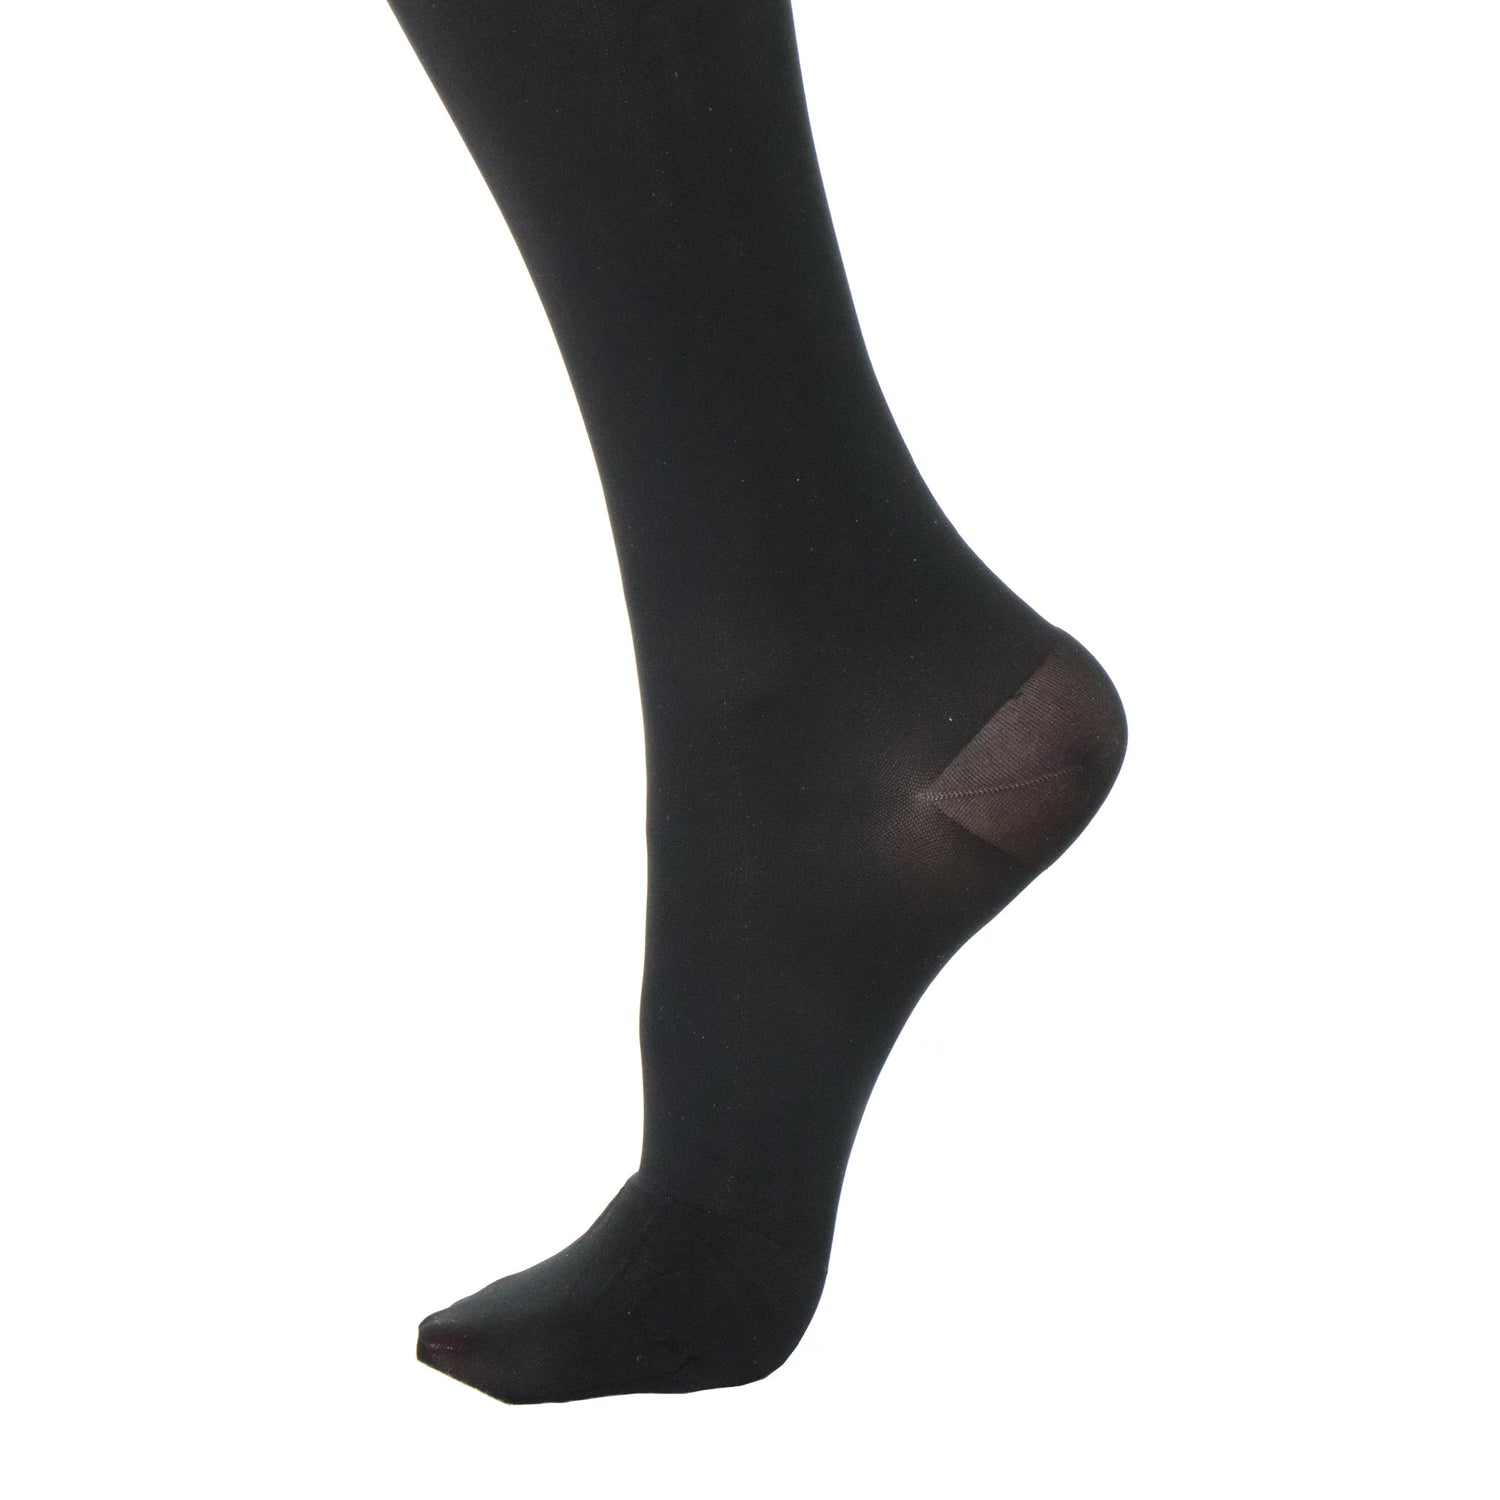 Doctor Brace Circutrend women knee compression stockings 30-40 mmhg closed toe black zoomed heel